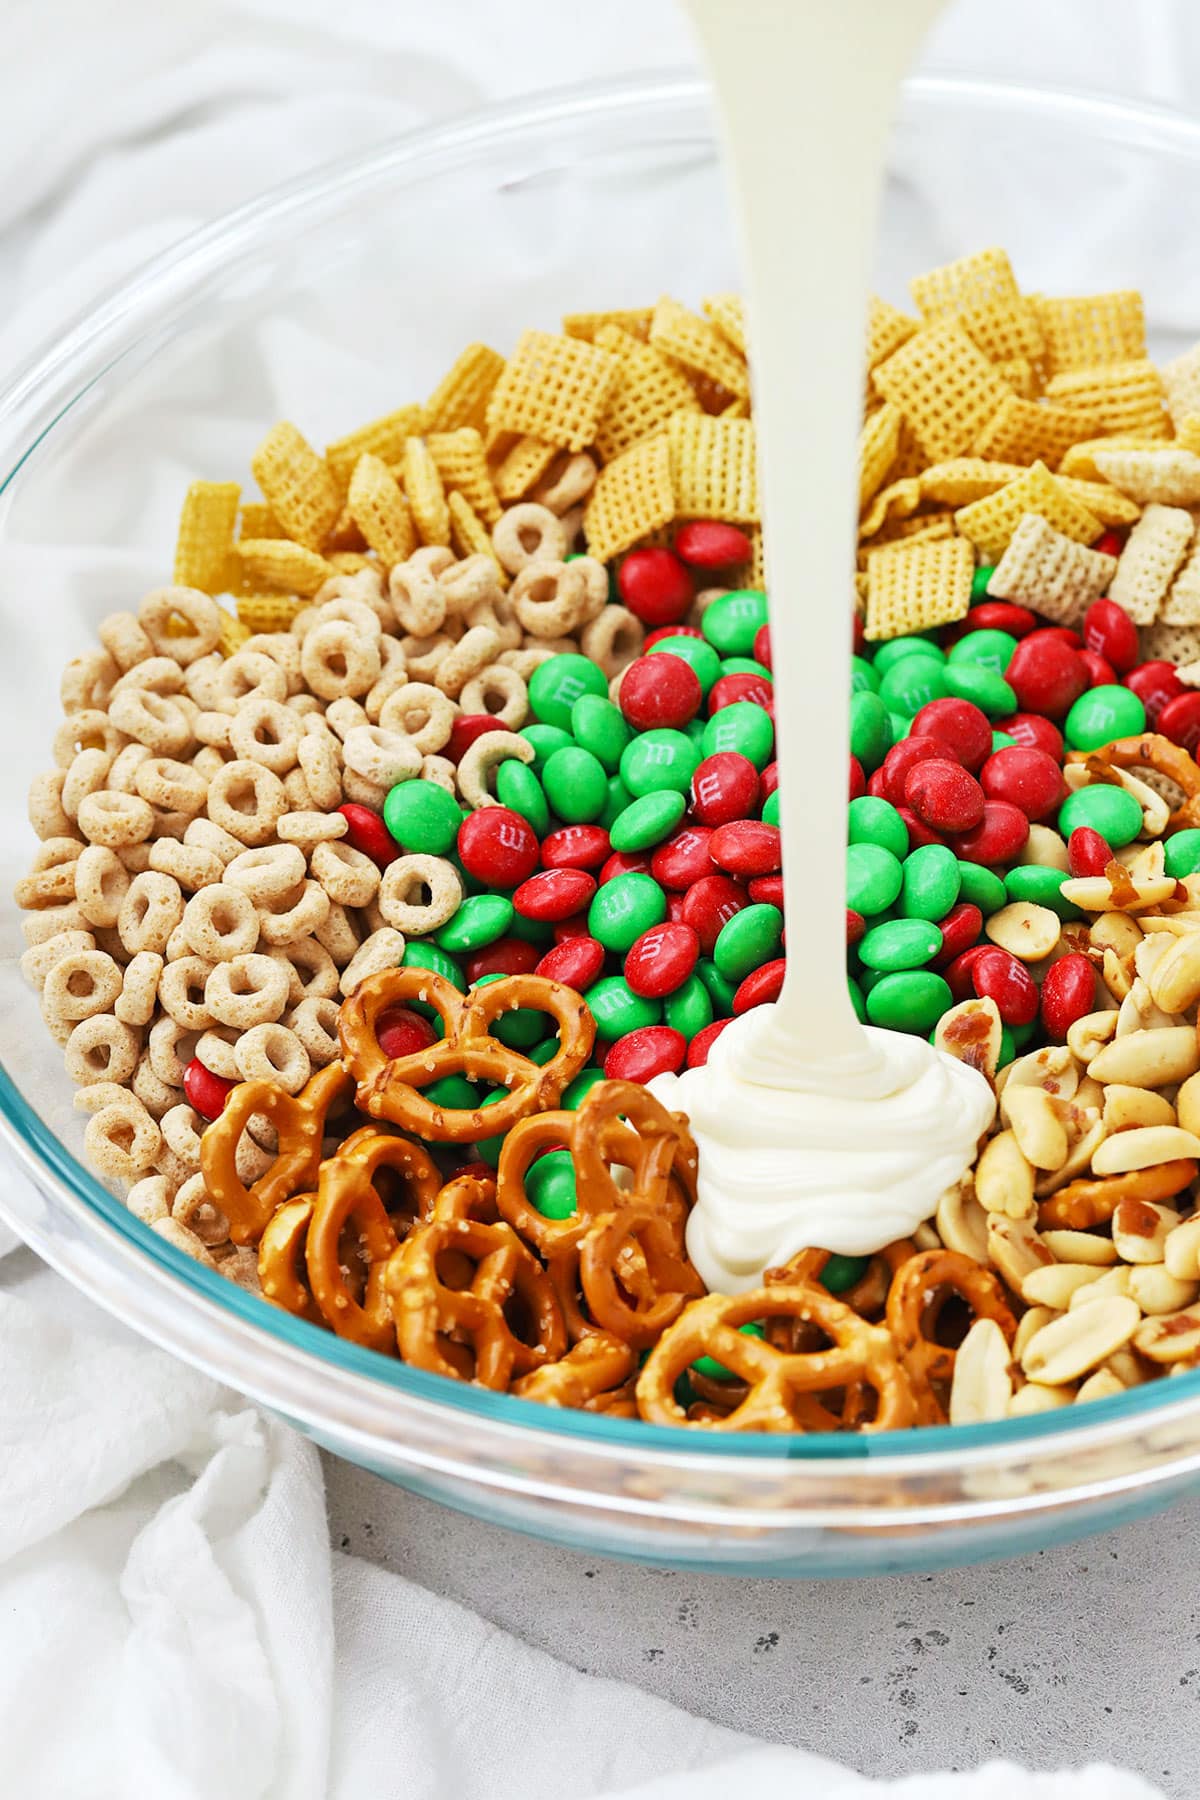 Pouring melted vanilla candy melts over cereal, pretzels, m&ms, and peanuts